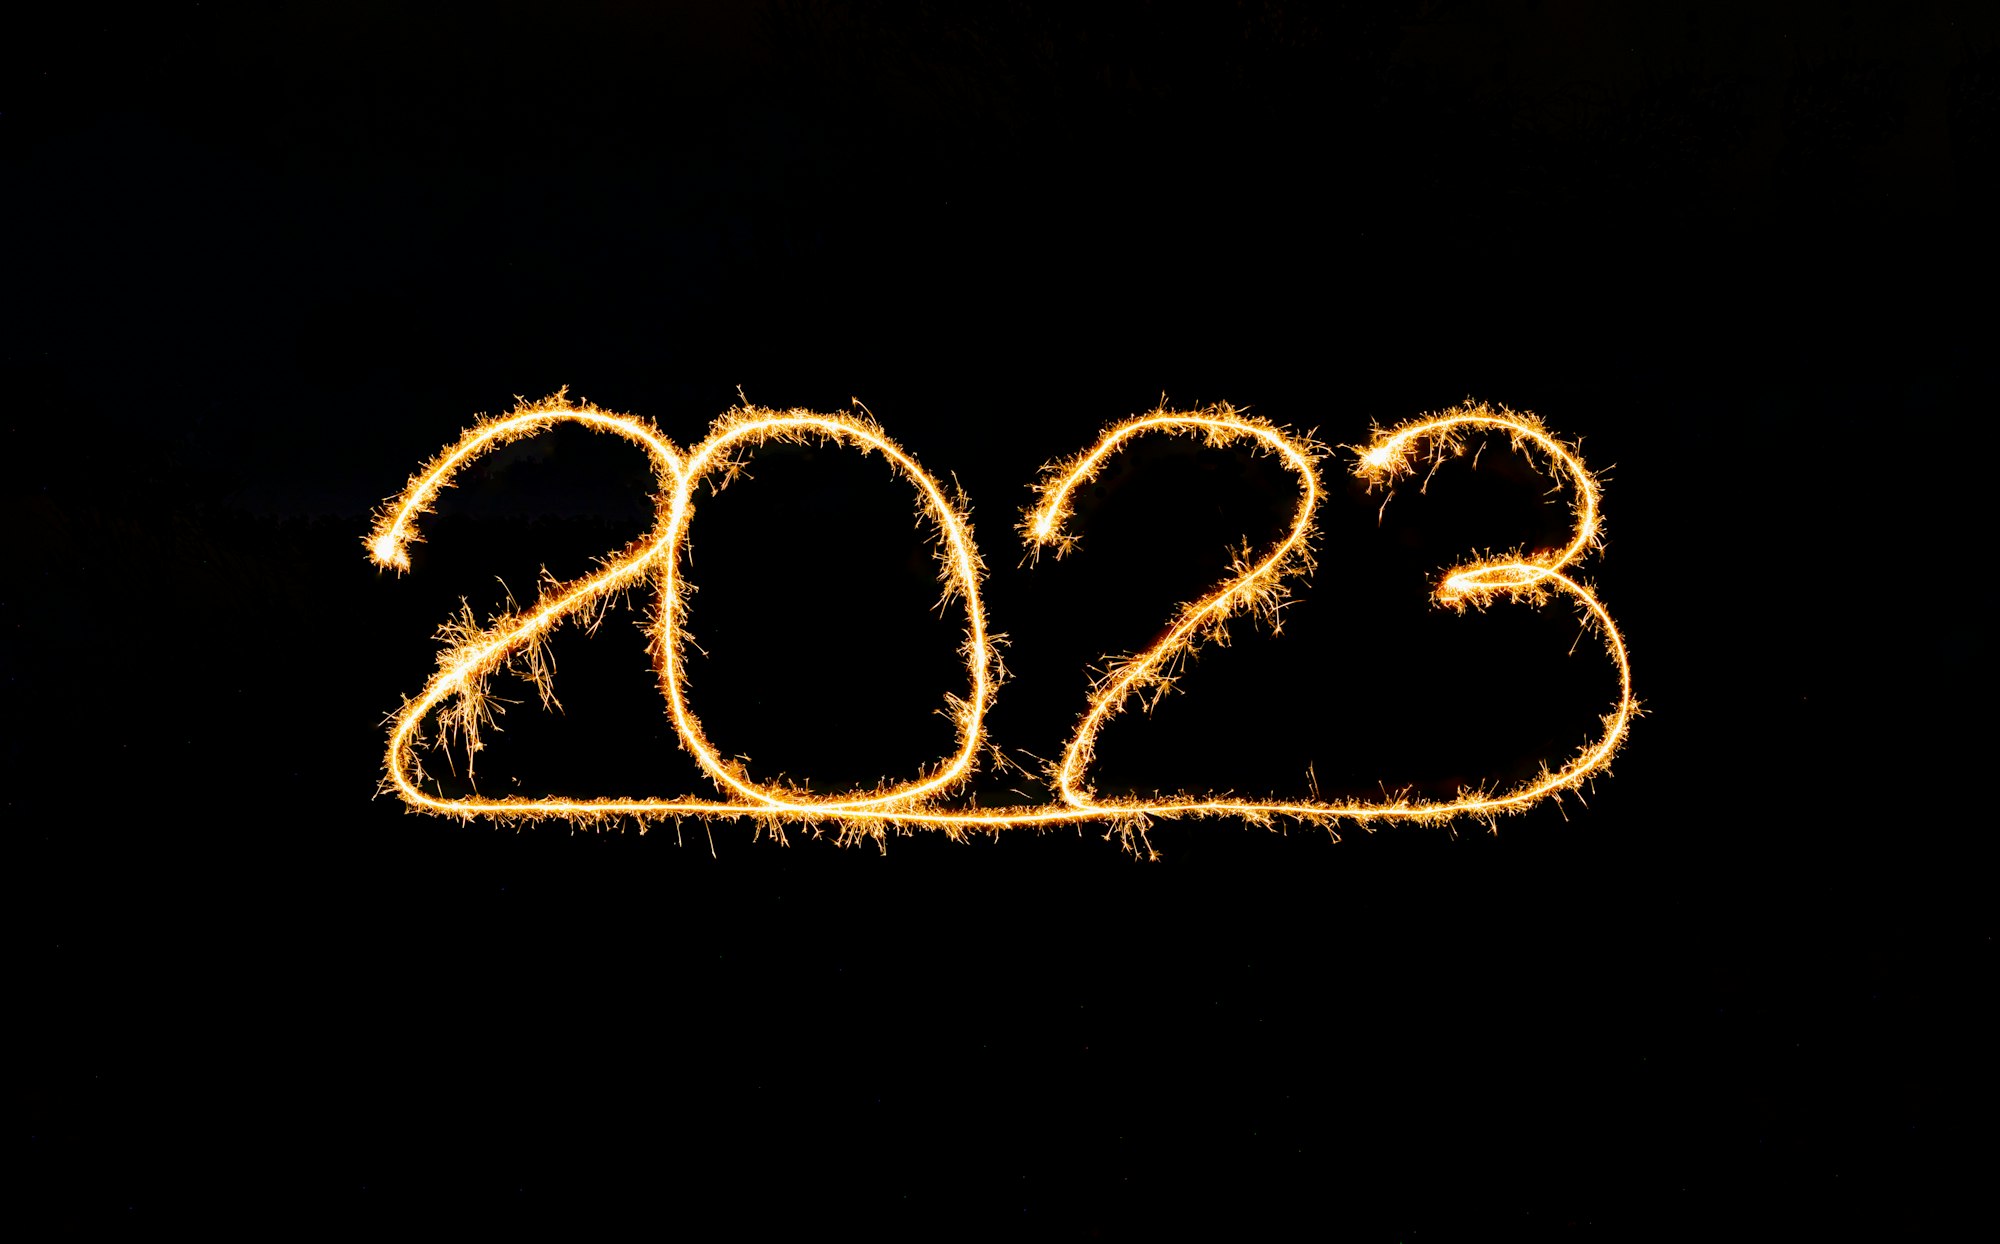 2023: The year of being vulnerable